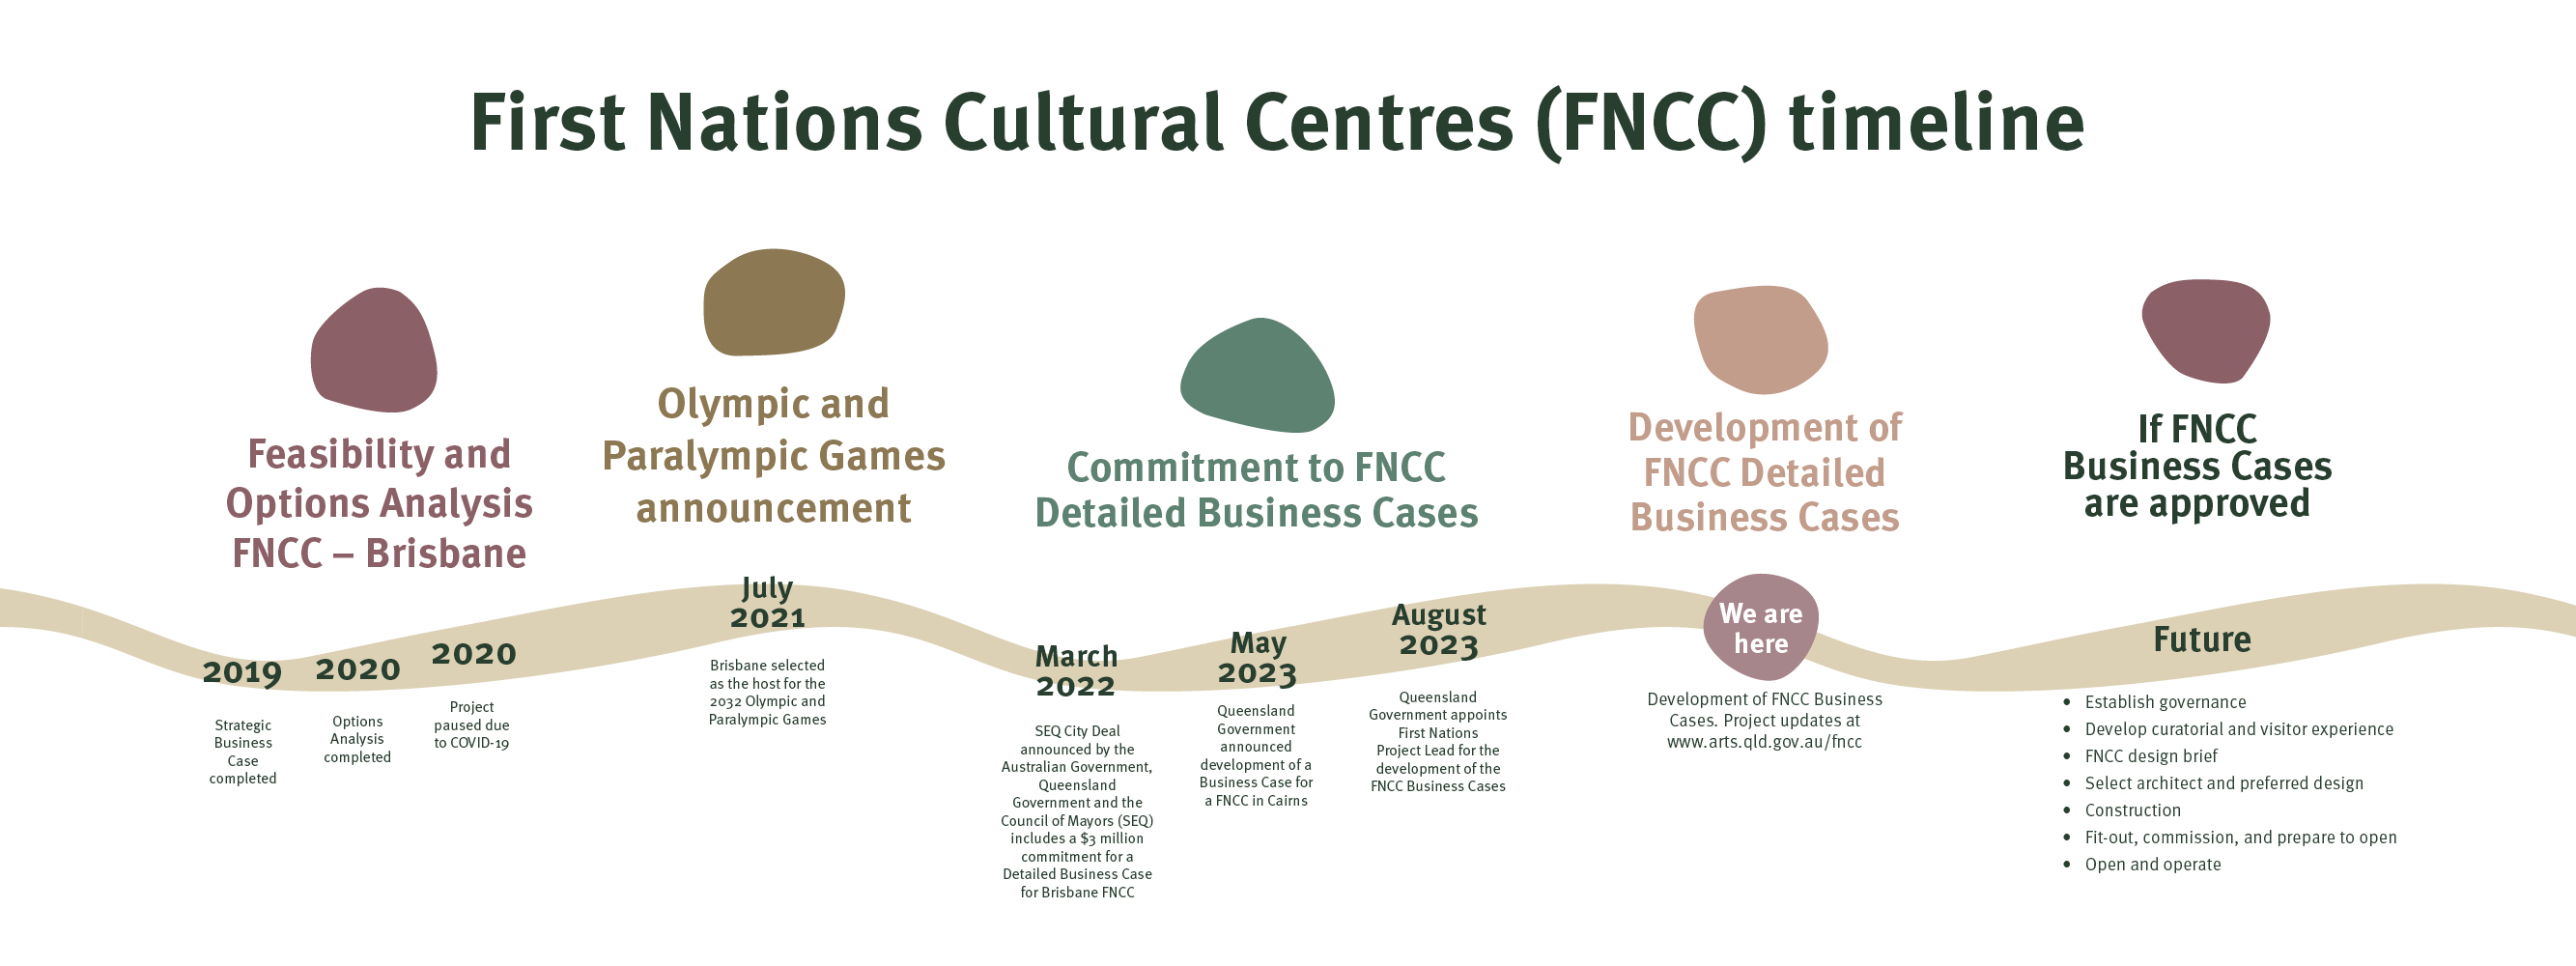 First Nations Cultural Centres timeline